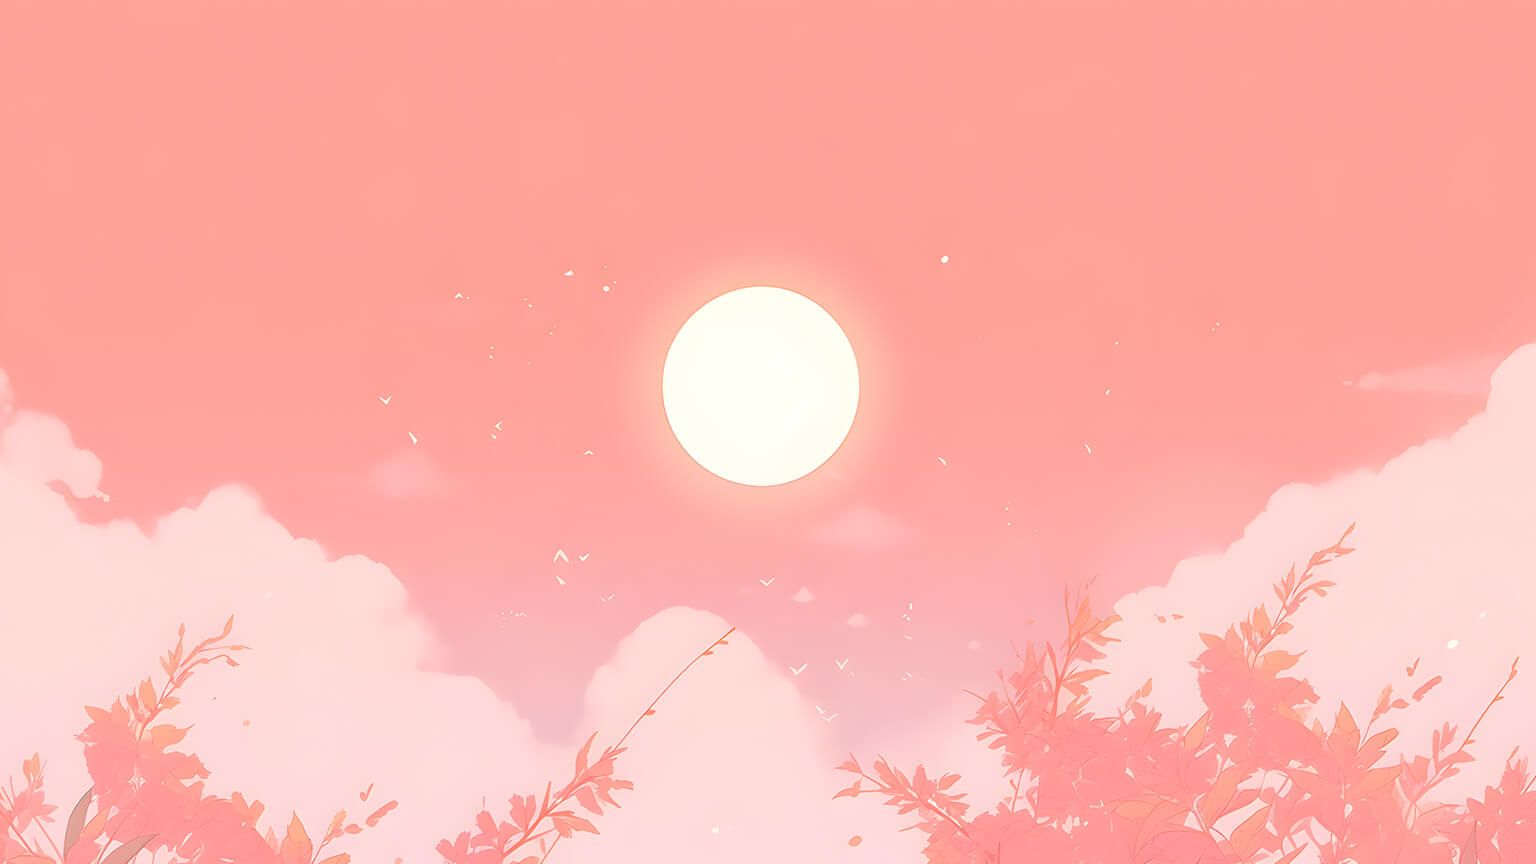 A pink and orange sunset with a white moon - Desktop